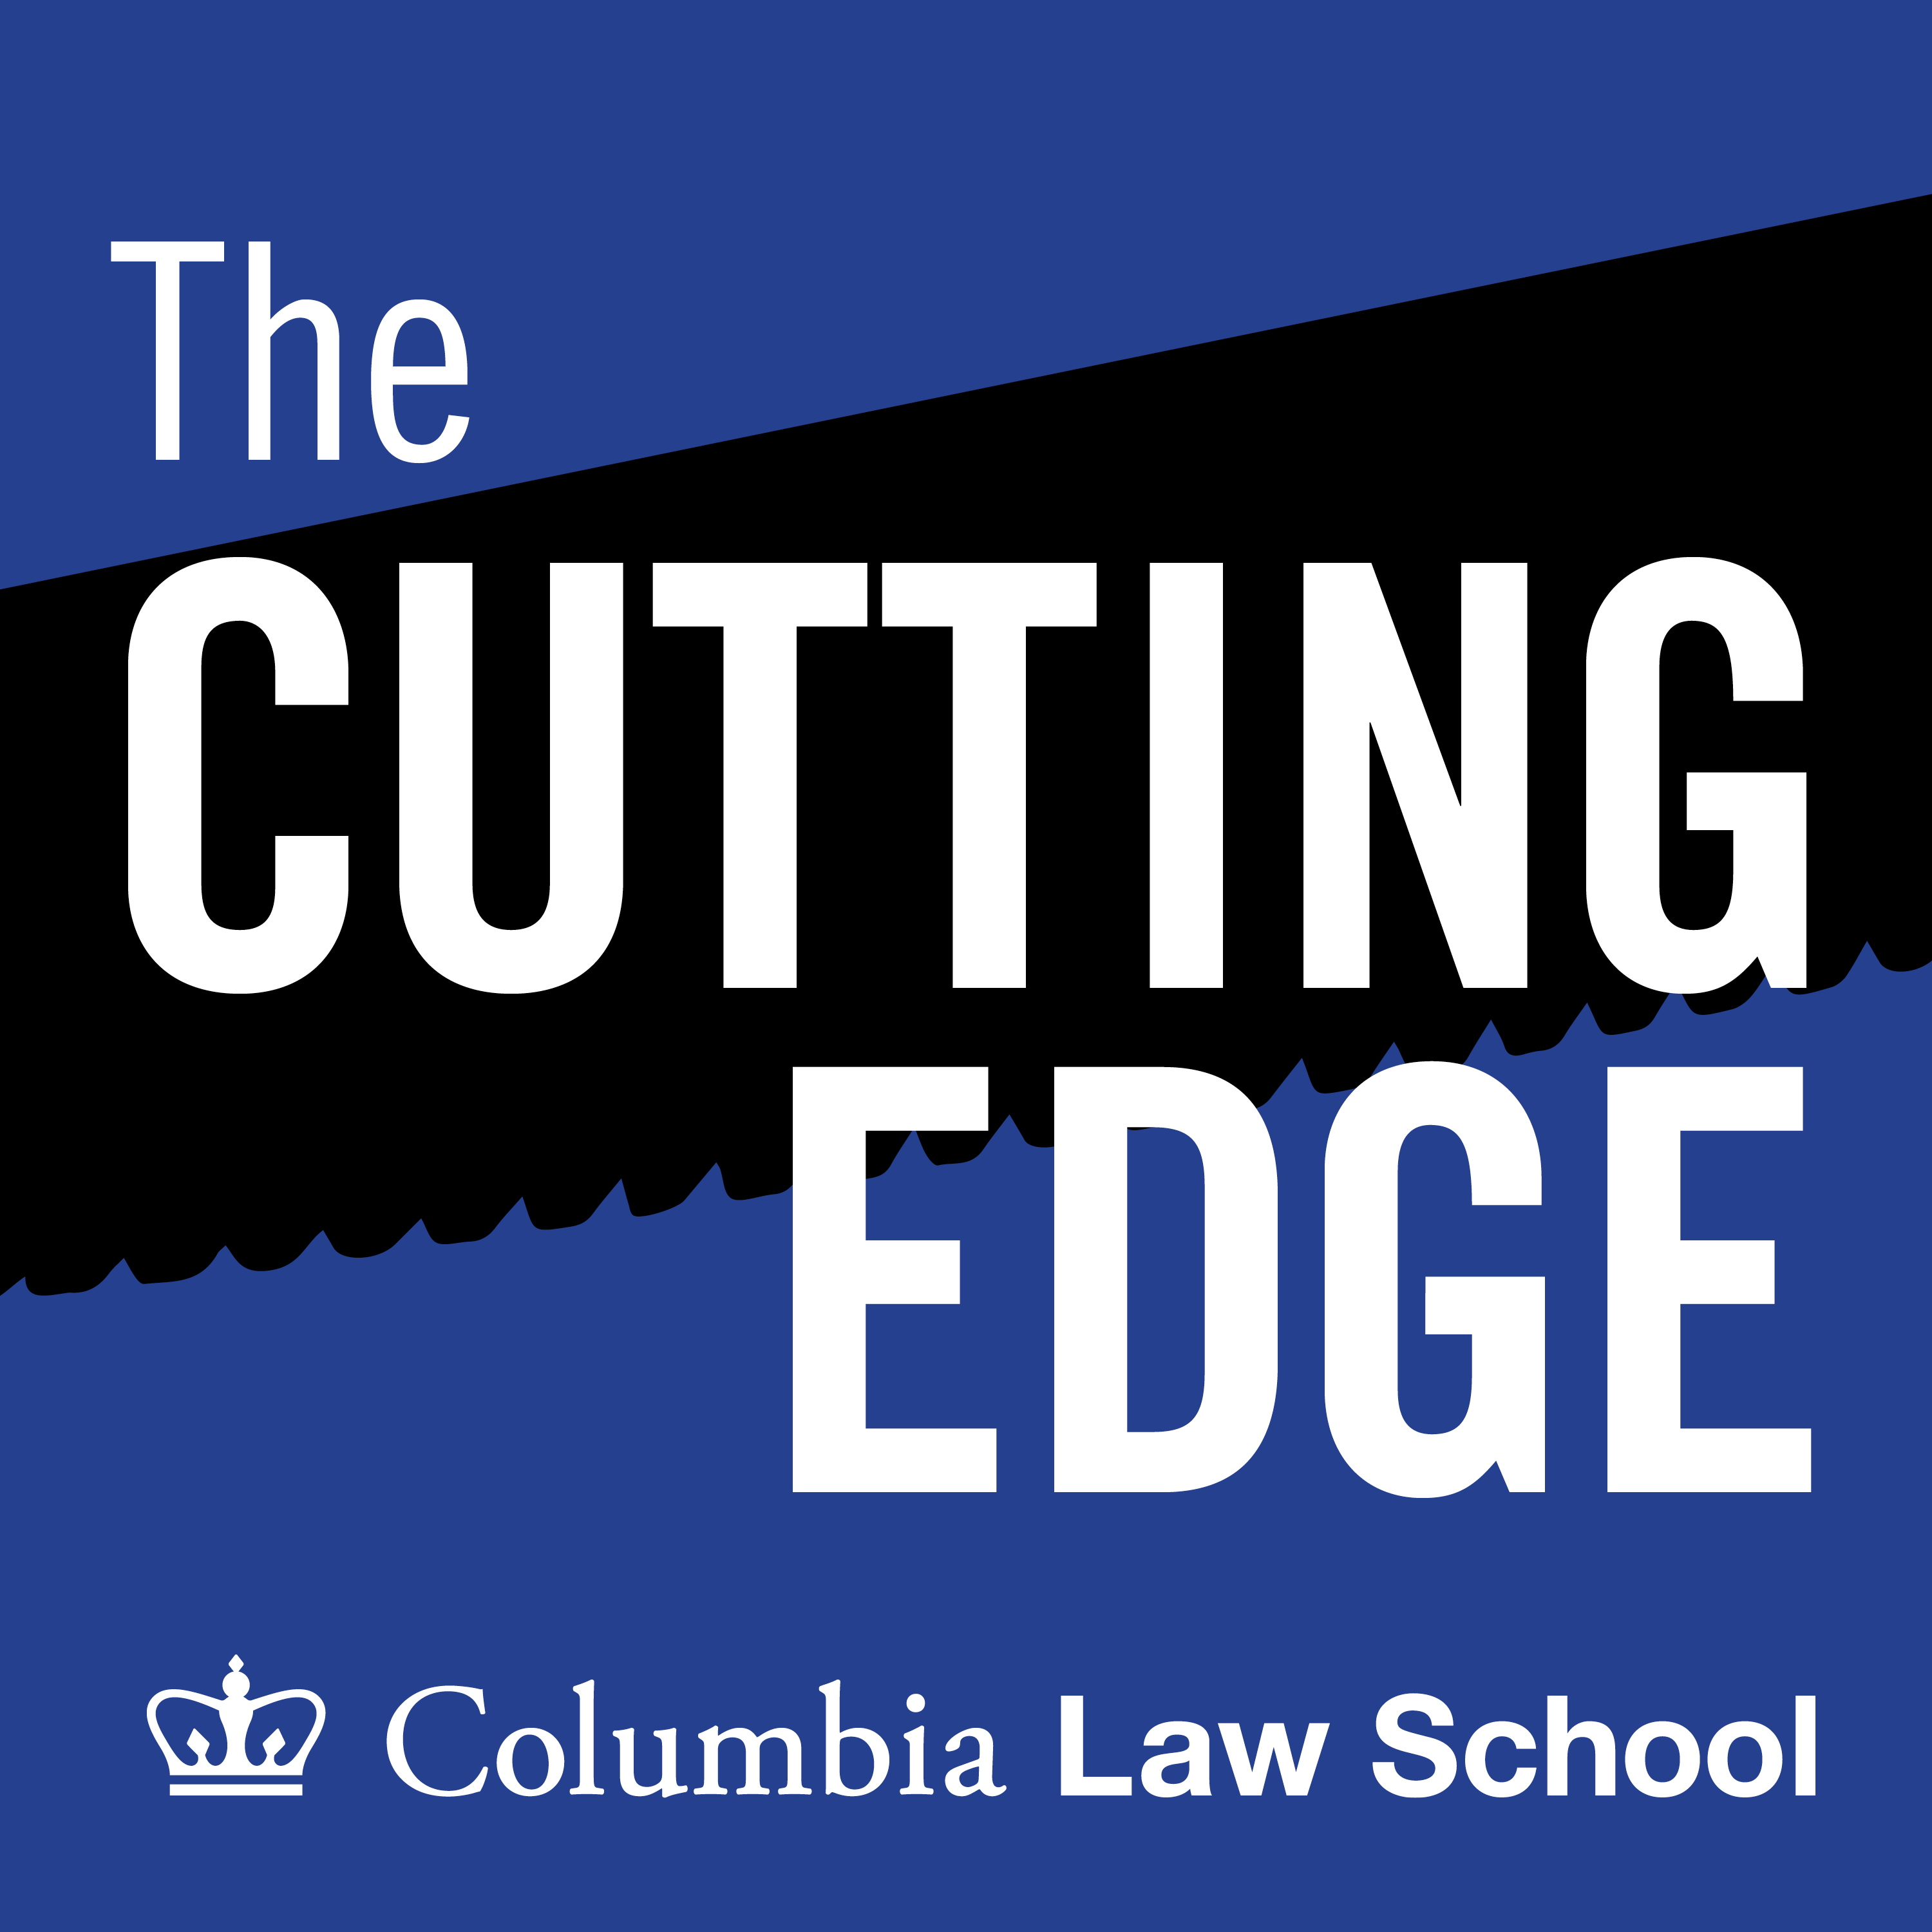 The Cutting Edge: Current Issues in White Collar Crime and